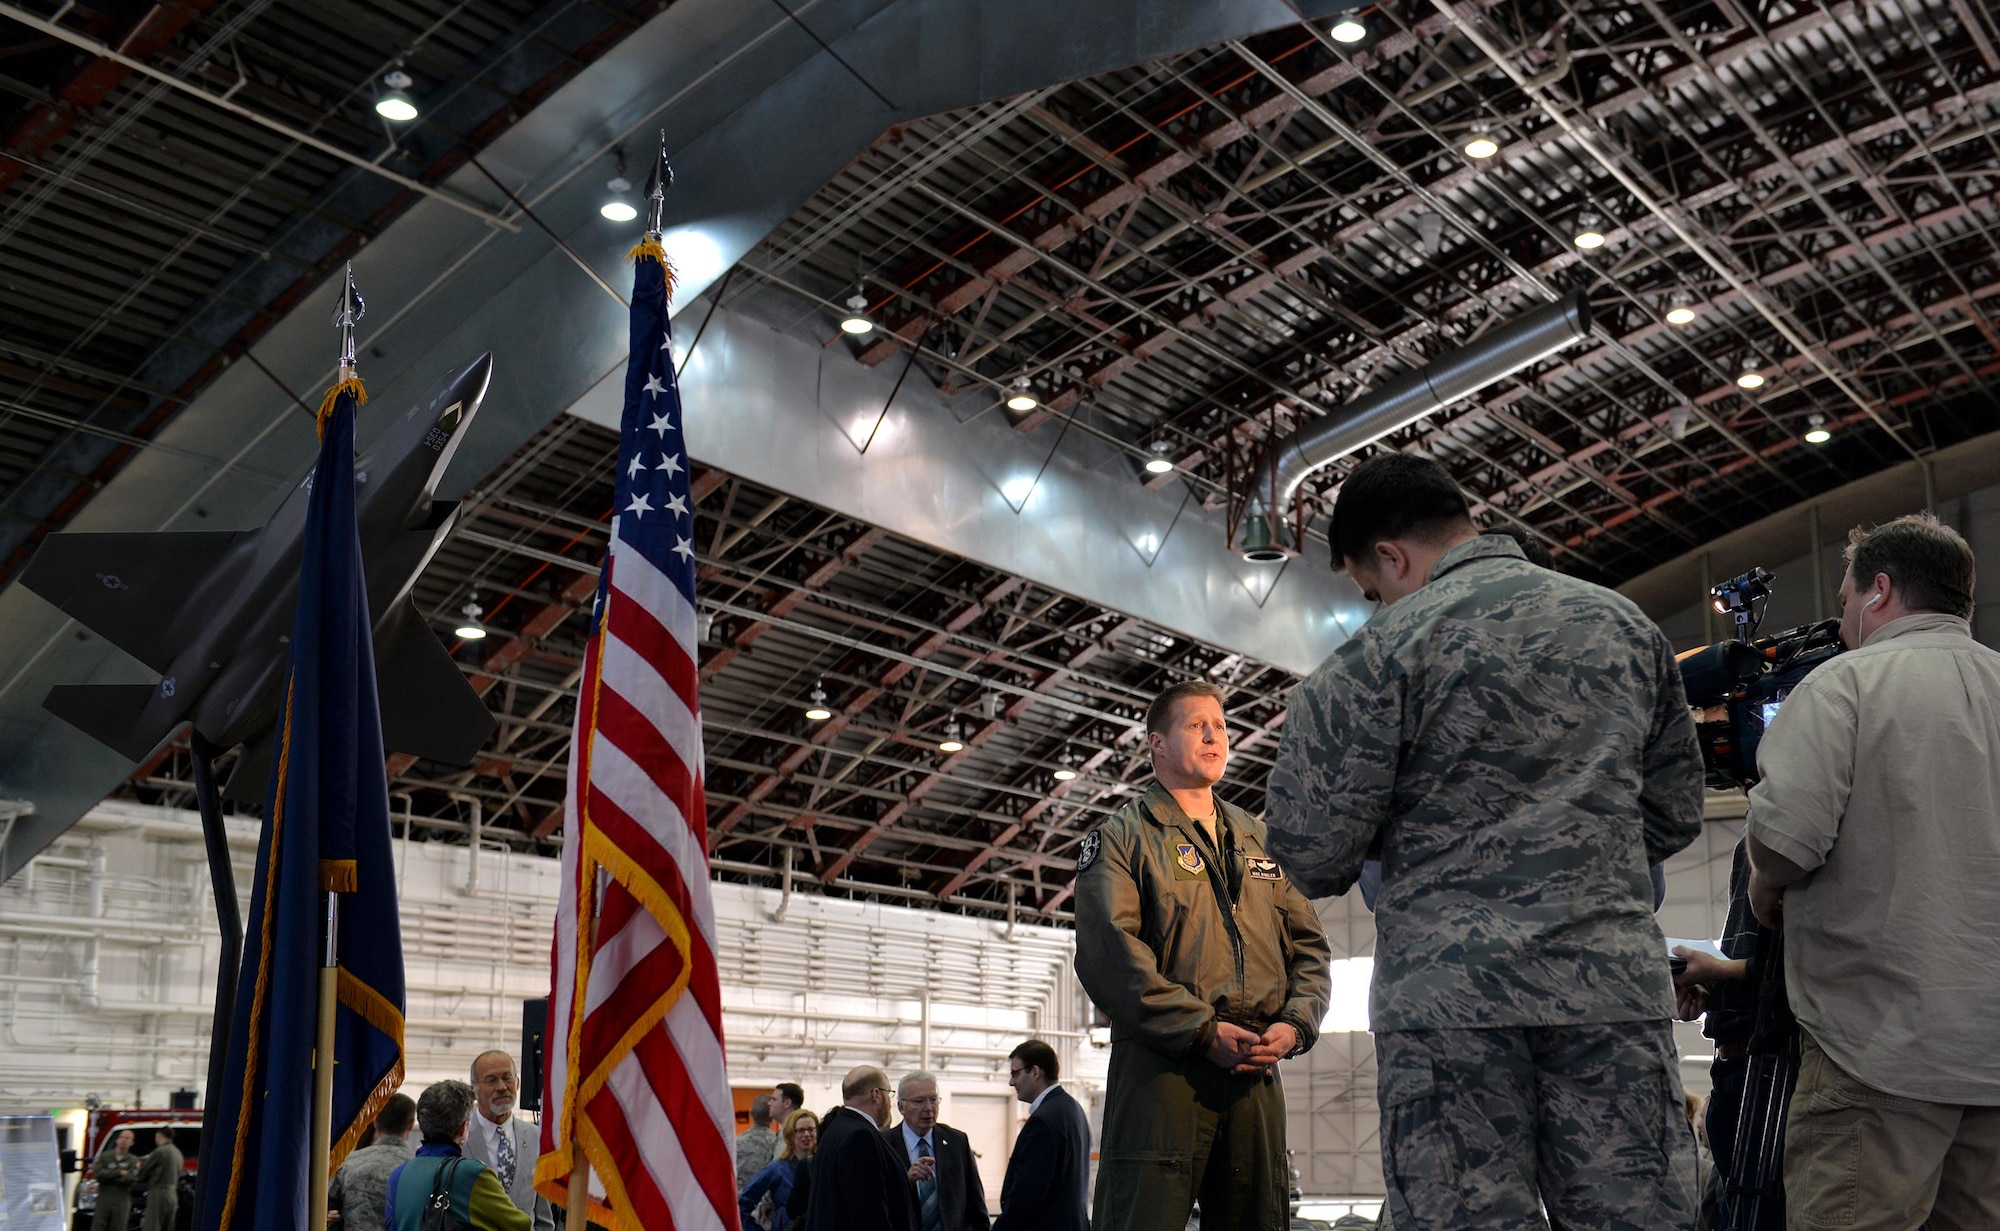 Air Force Col. Michael P. Winkler, the 354th Fighter Wing commander, participates in an interview following a March 4, 2016, ceremony at Eielson Air Force Base, Alaska, where he announced the news the Secretary of the Air Force made the decision to select Eielson as the location of the Air Force’s first F-35A operational base in the Pacific Air Forces’ Area of Responsibility. Air Force officials chose Eielson after a lengthy analysis of the location’s operational considerations, installation attributes, environmental factors and cost. (U.S. Air Force photo by Master Sgt. Karen J. Tomasik/Released)